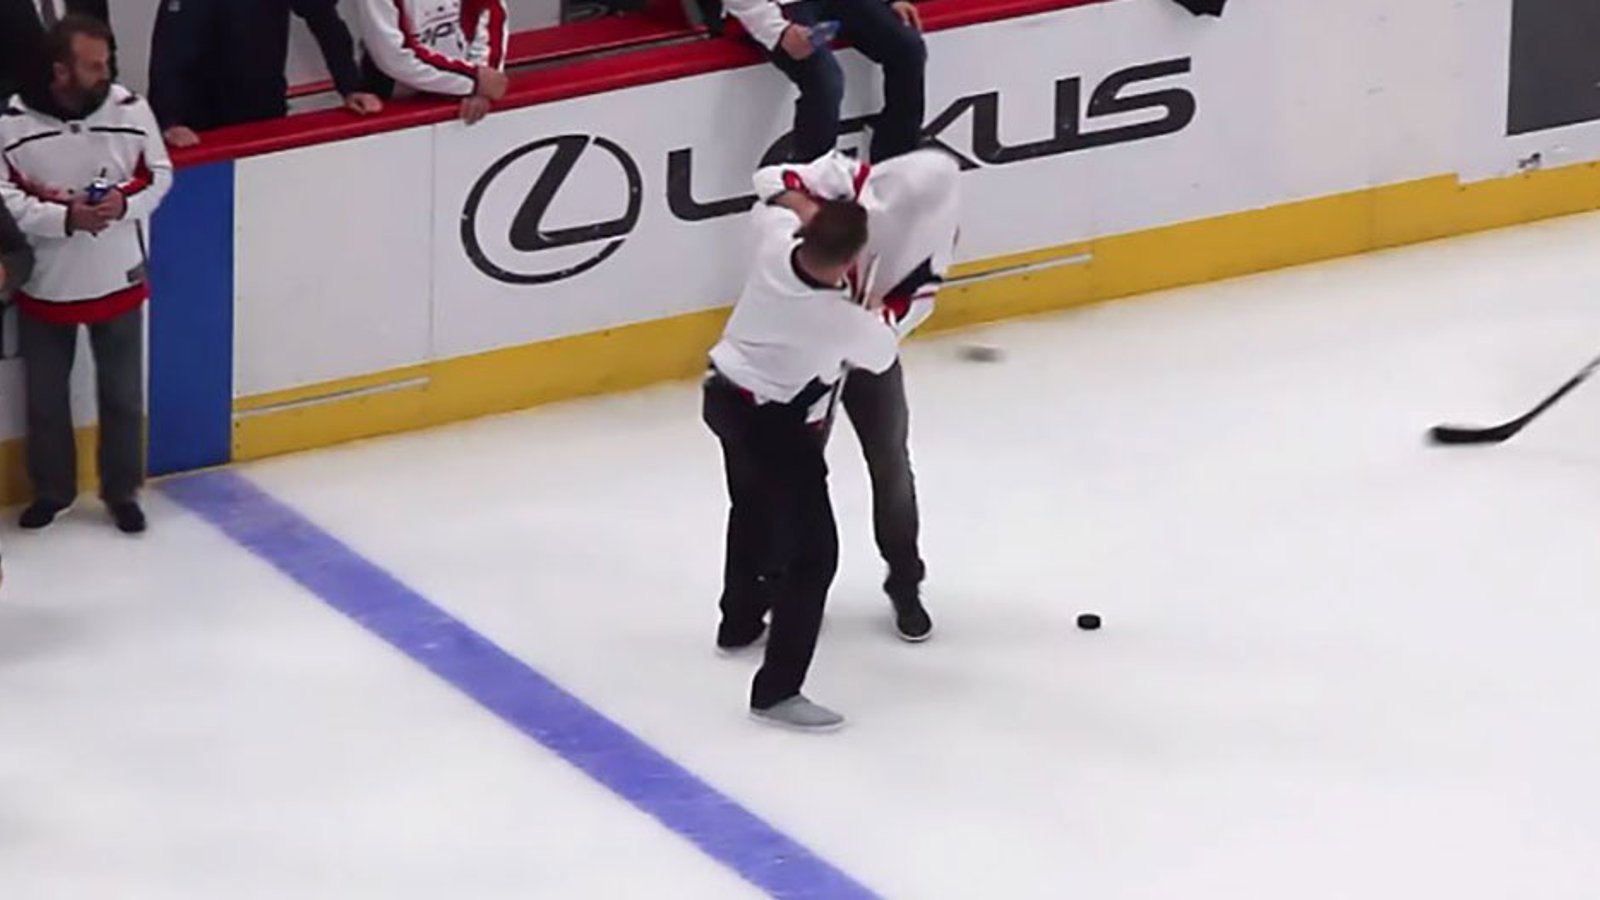 Drunken Nationals players hit the ice and attempt to play hockey after Caps beat Flames